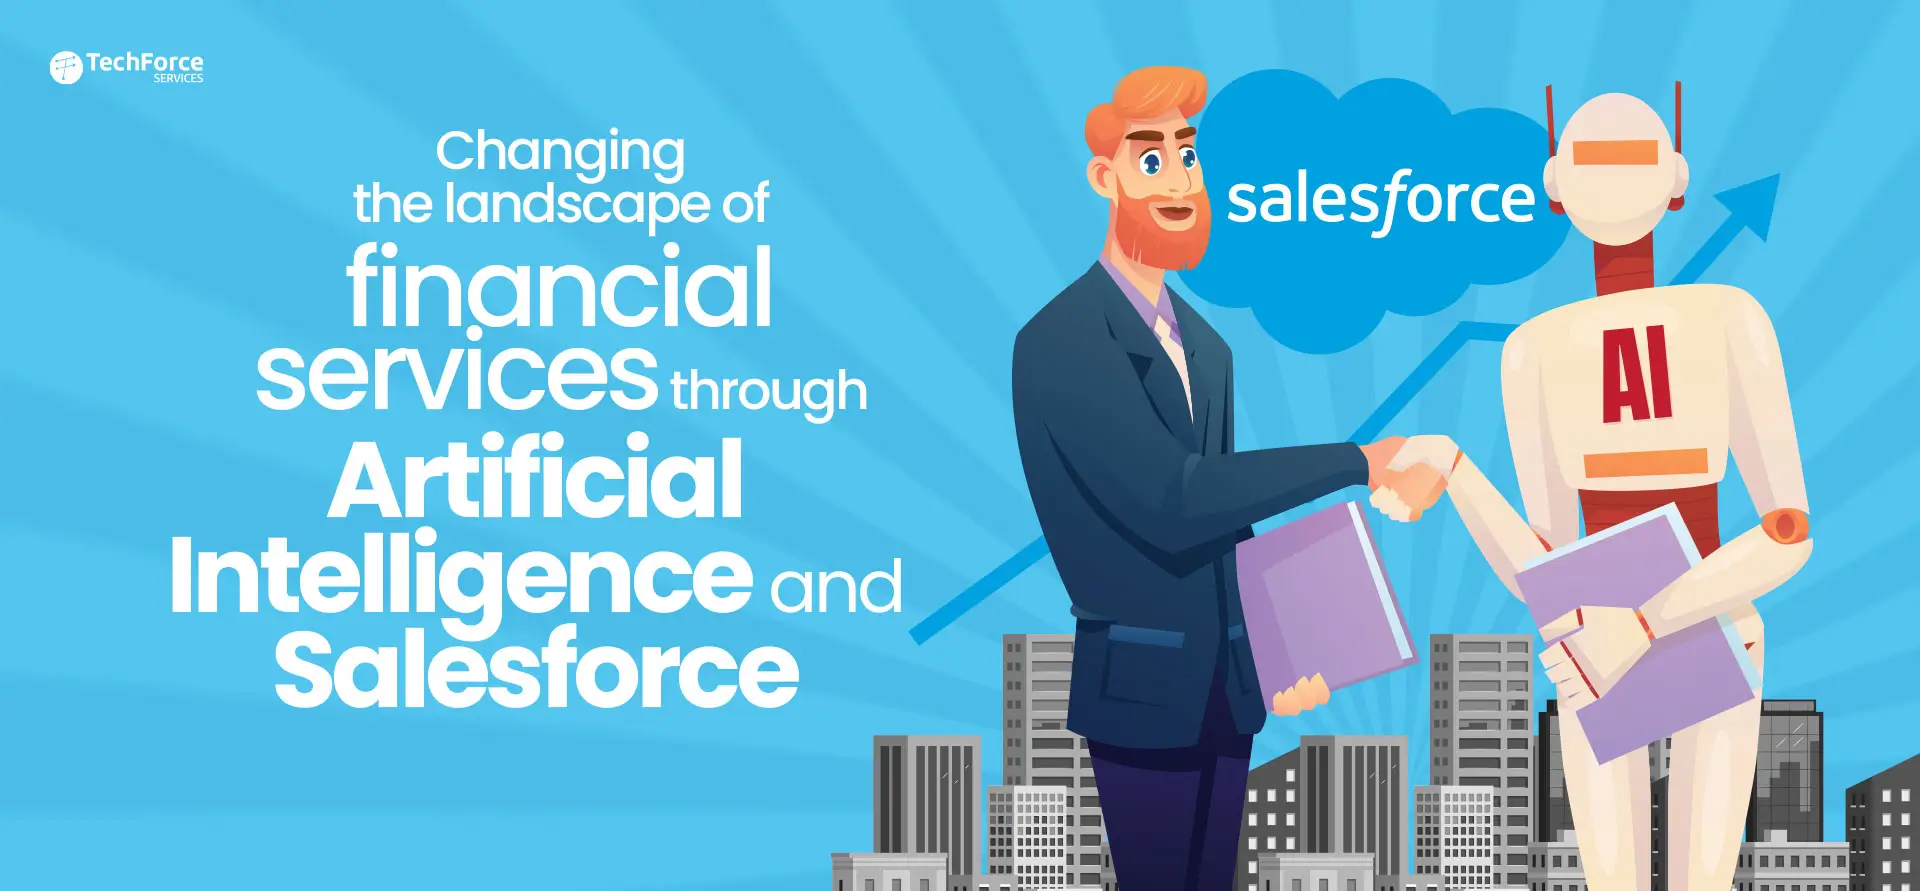 Changing the landscape of financial services through Artificial Intelligence and Salesforce